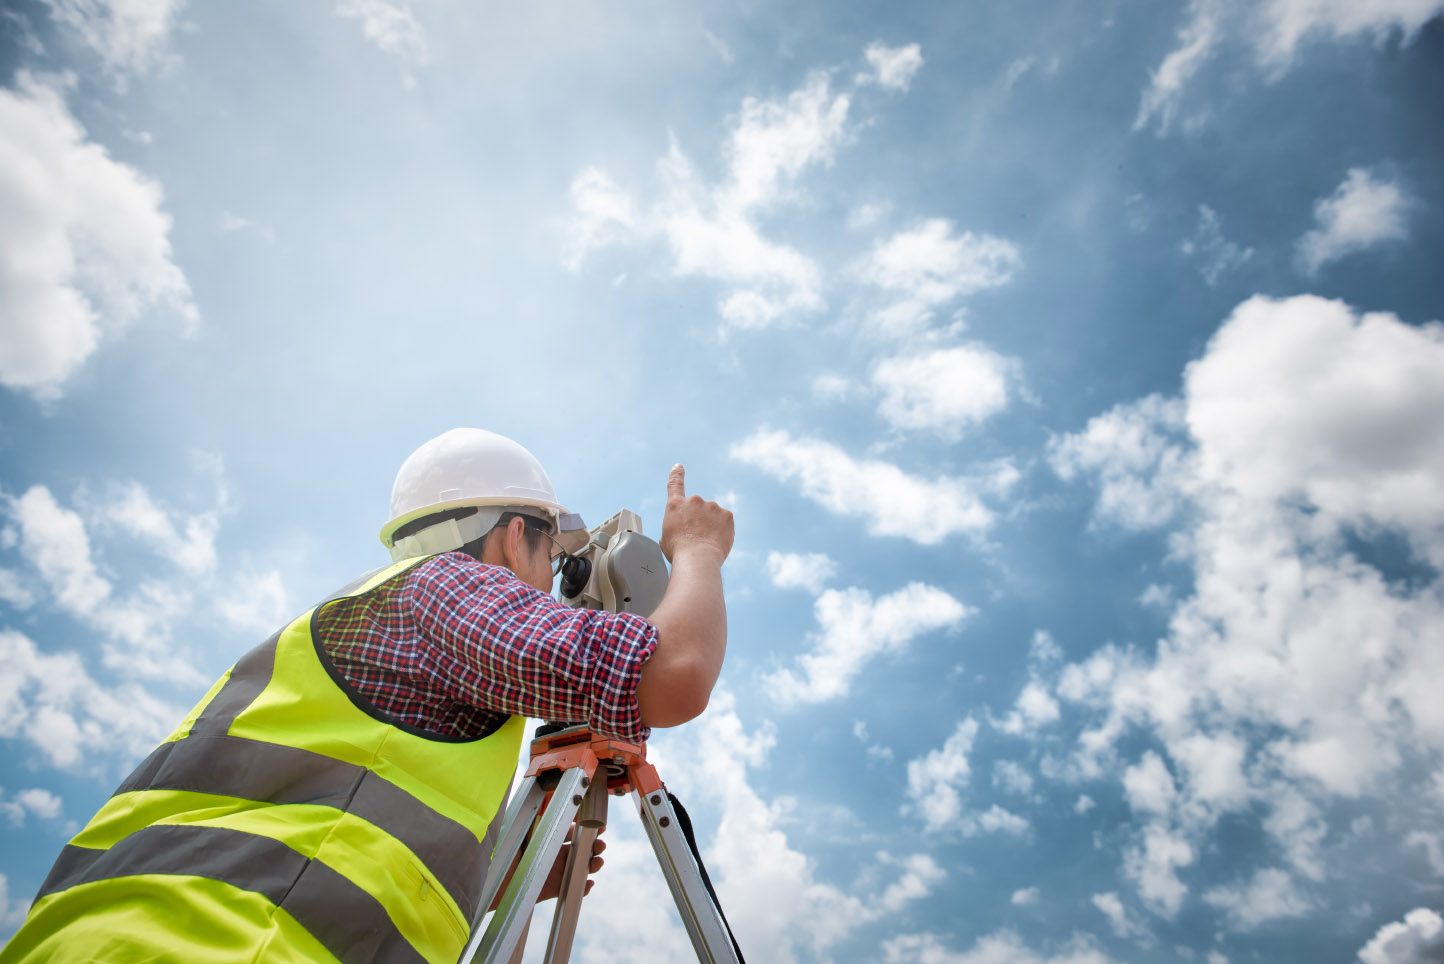 Surveyor equipment. Surveyor’s telescope at construction site or Surveying for making contour plans are a graphical representation of the lay of the land before startup construction work